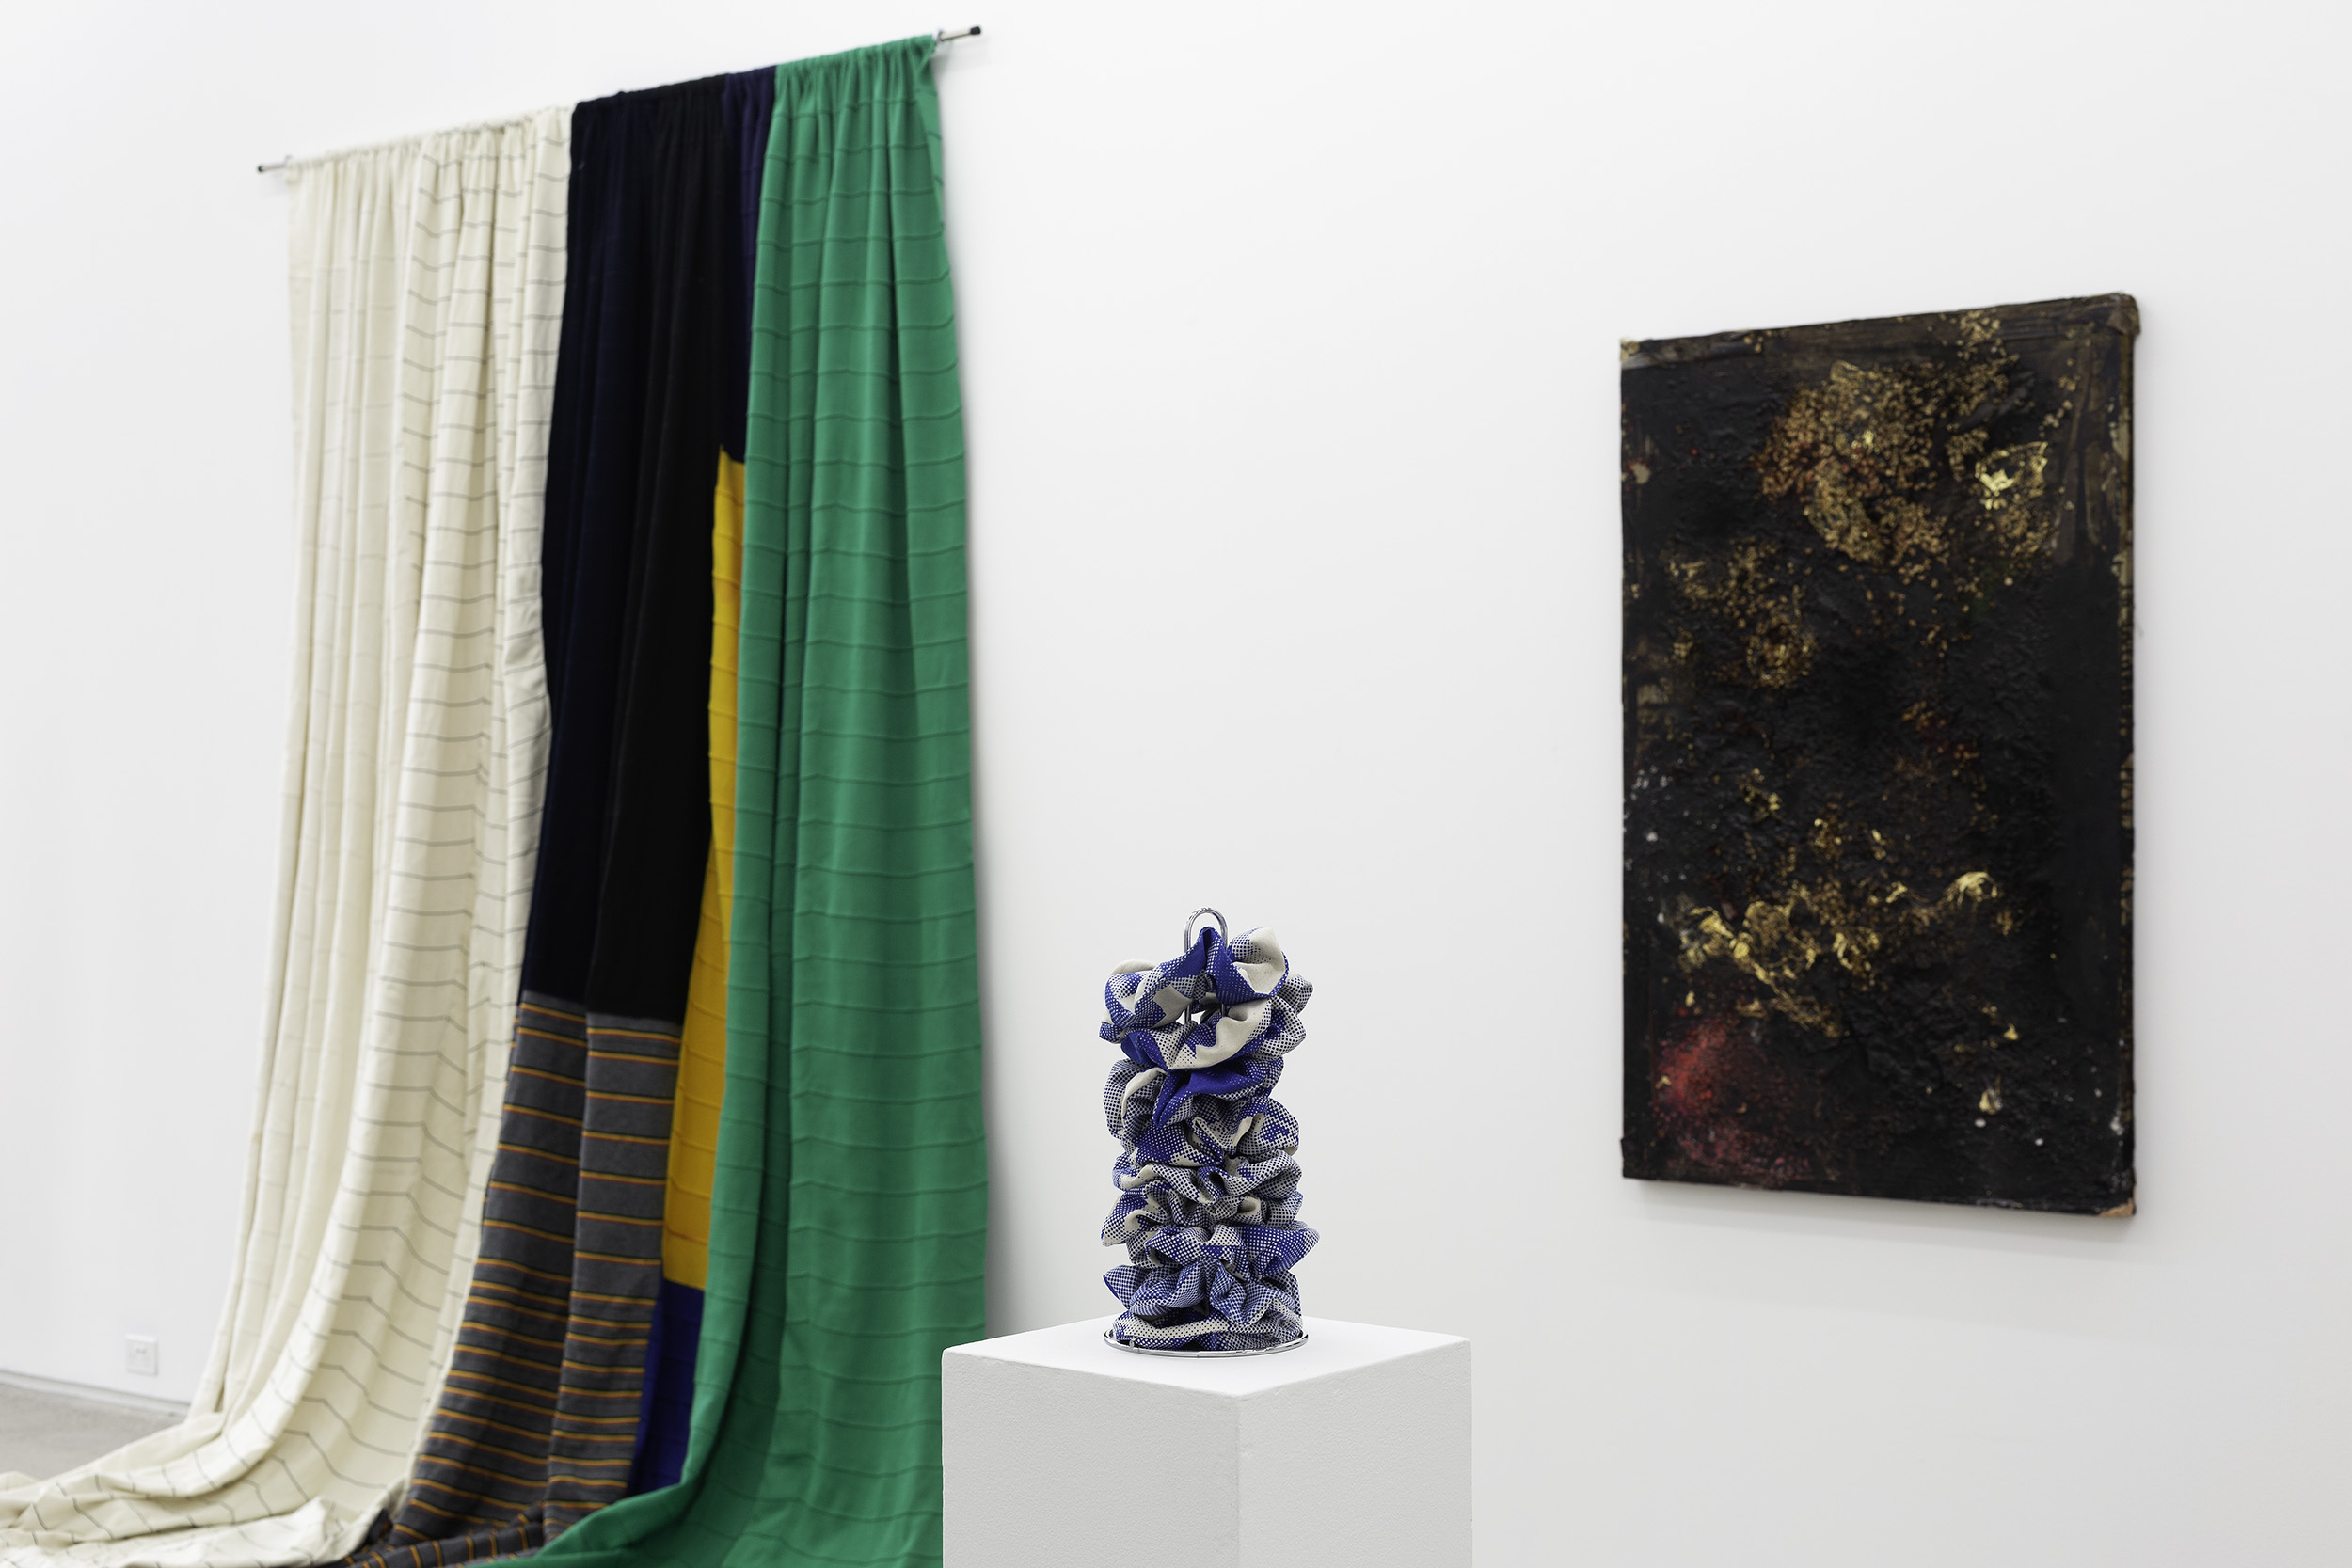 Installation view of 'Empty Pockets', curated by Sineenart Meena, featuring work by James Nguyen, Kirtika Kain and Kay Abude at Gertrude Glasshouse. Photo: Christian Capurro.